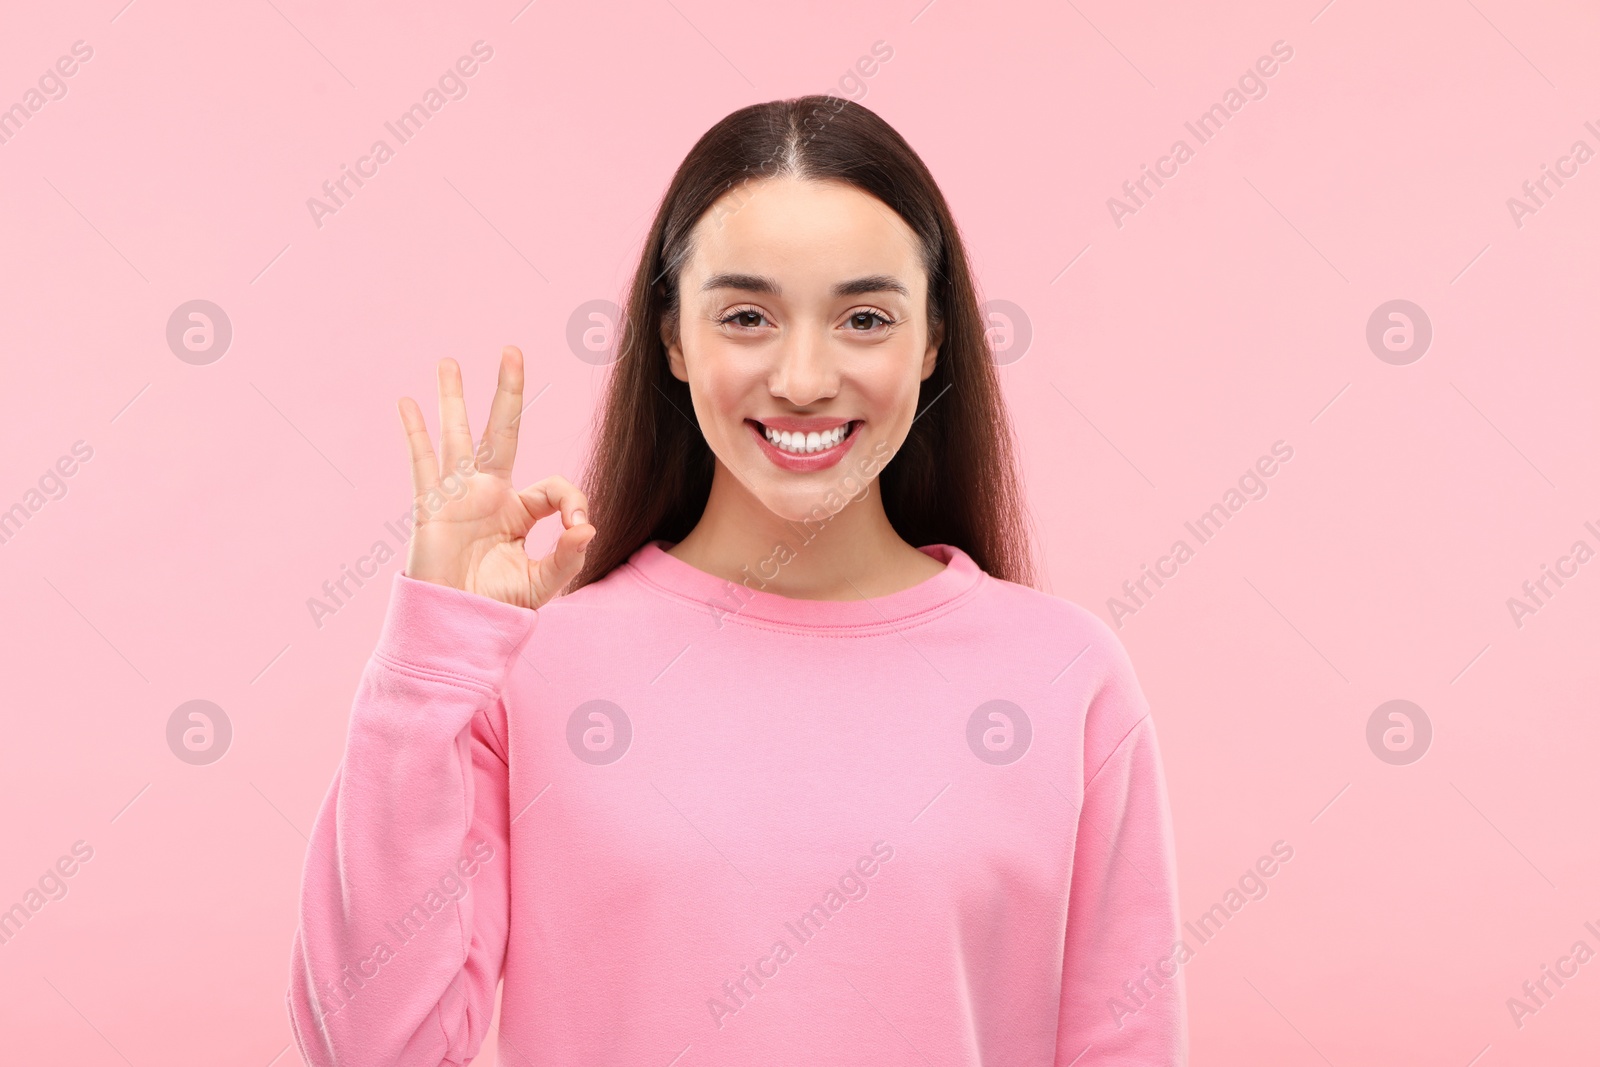 Photo of Beautiful woman with clean teeth showing OK gesture on pink background